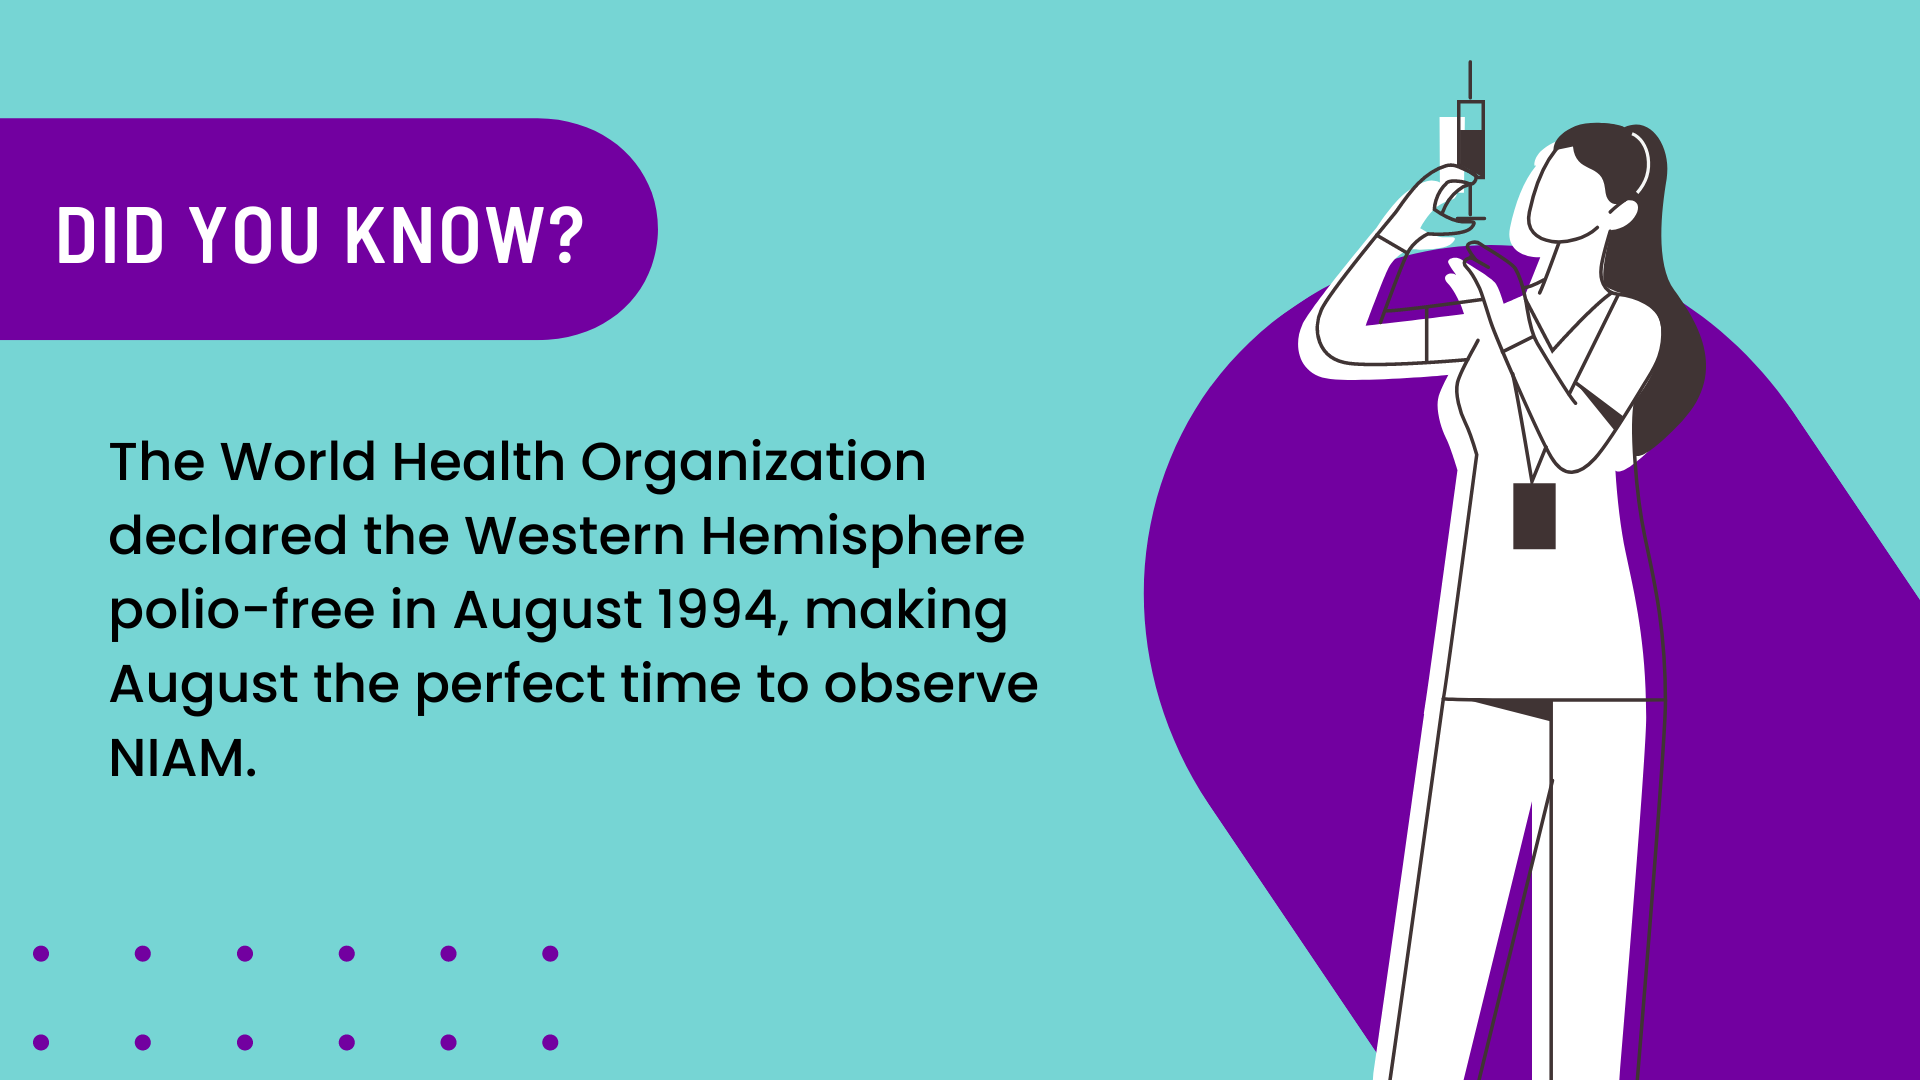 An illustration that explains how the World Health Organization declared the Western Hemisphere polio-free in August 1994, making August the perfect time to recognize NIAM.